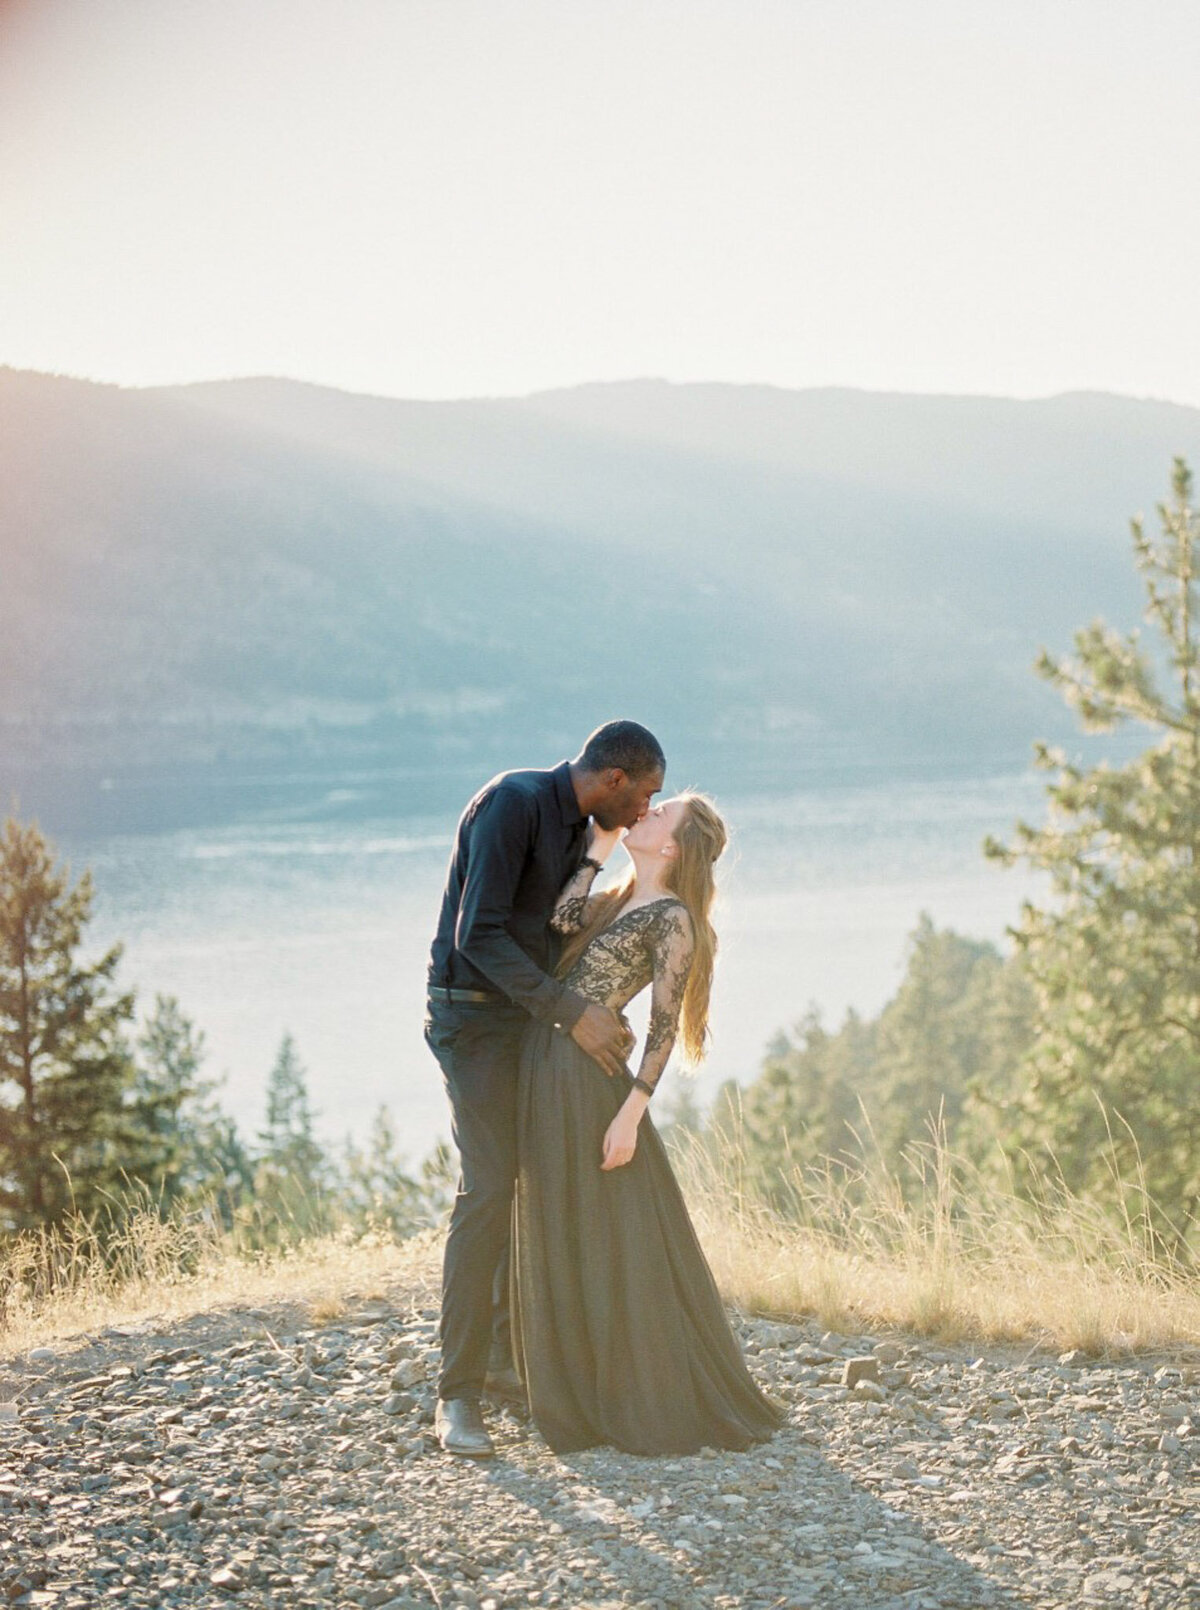 Romantic bride and groom portrait captured by Minted Photography, fine art and romantic wedding photographer in Okanagan, BC. Featured on the Bronte Bride Vendor Guide.